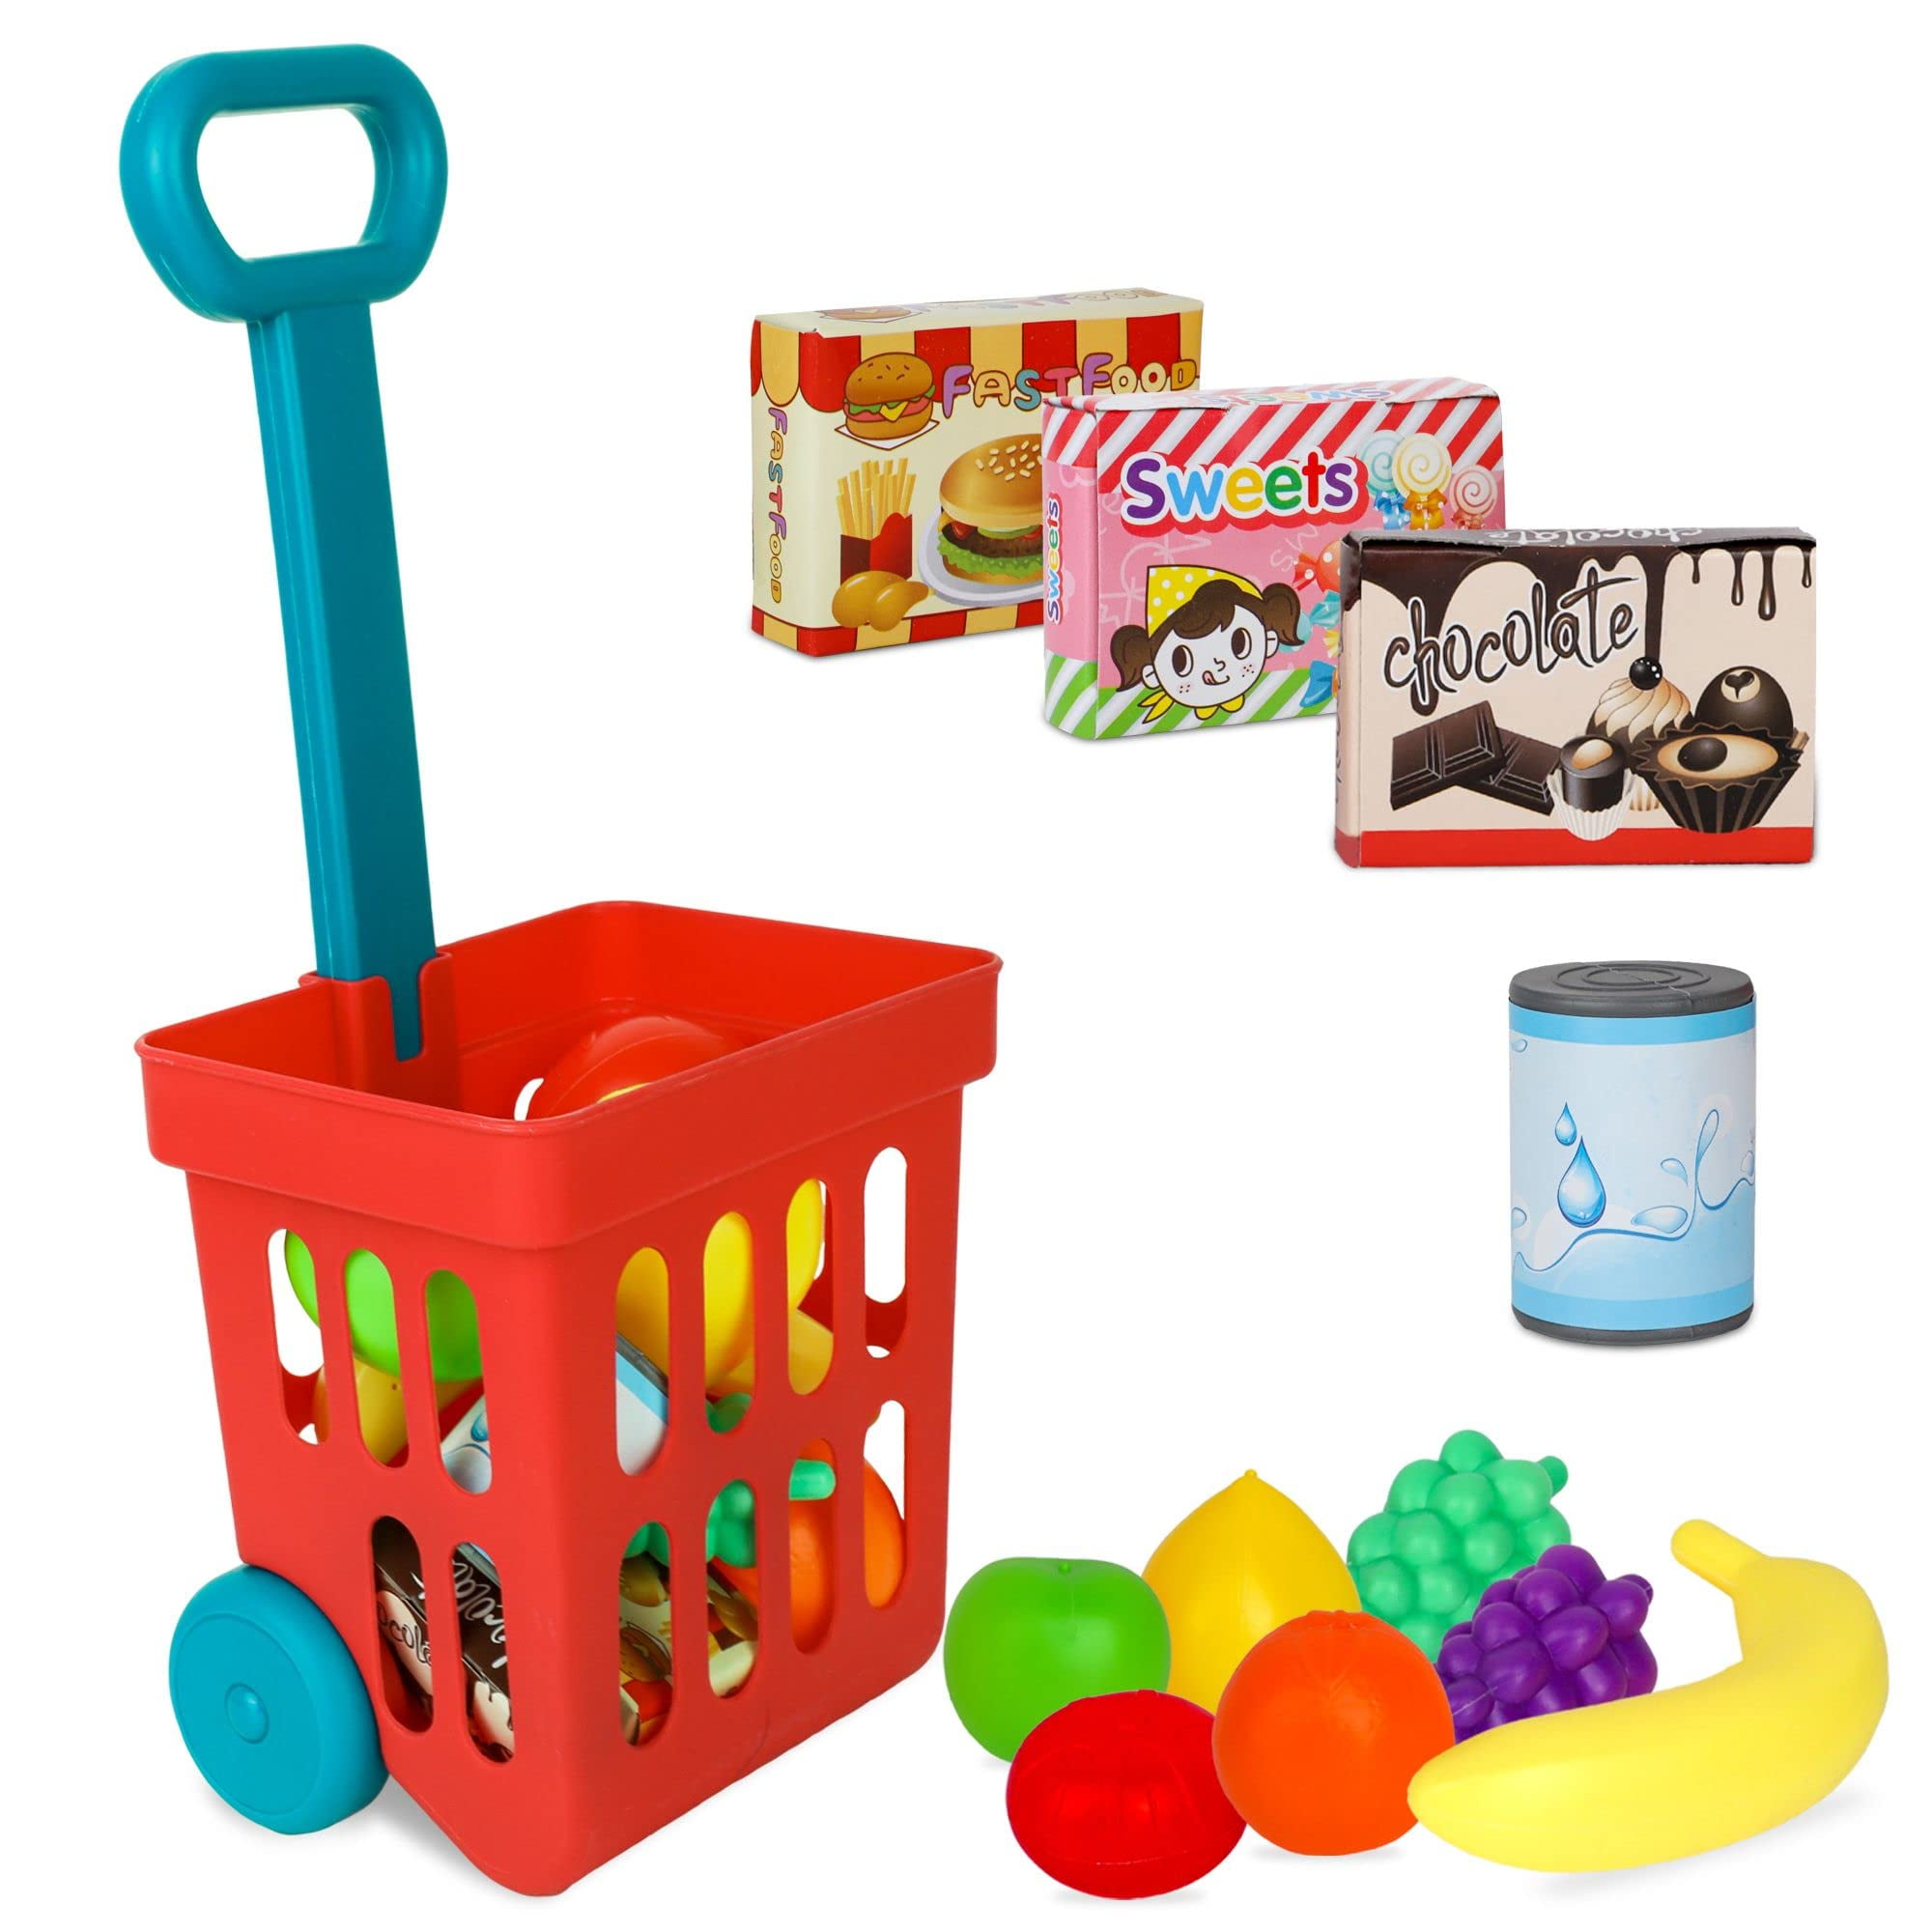 Playkidz Toddlers Toy Shopping Cart Play Set - 12 Piece Small Size